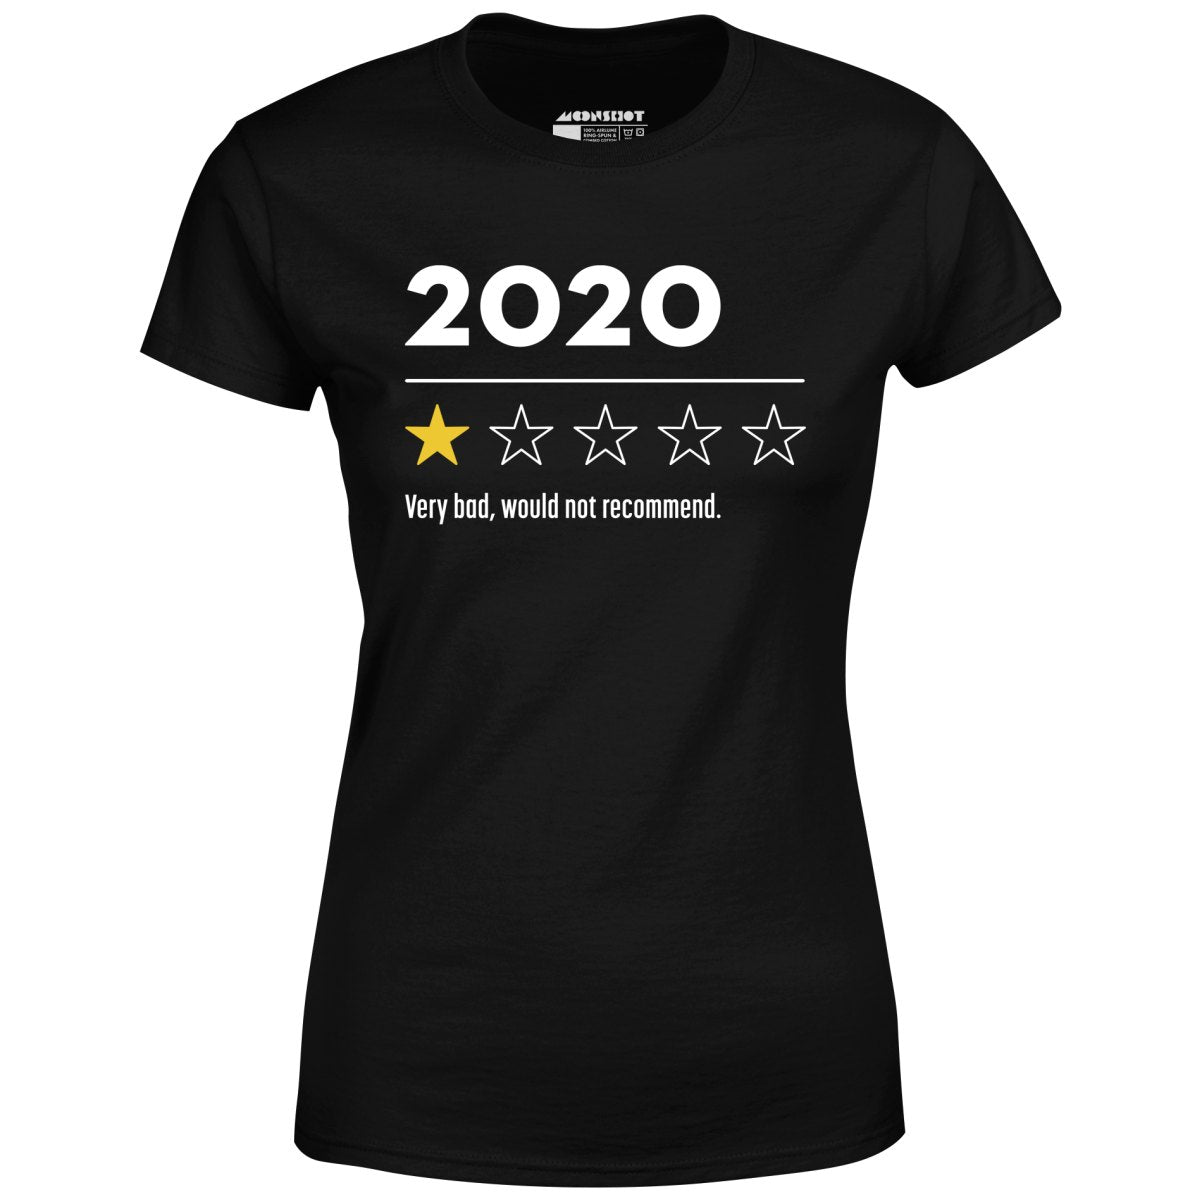 2020 Very Bad Would Not Recommend - Women's T-Shirt